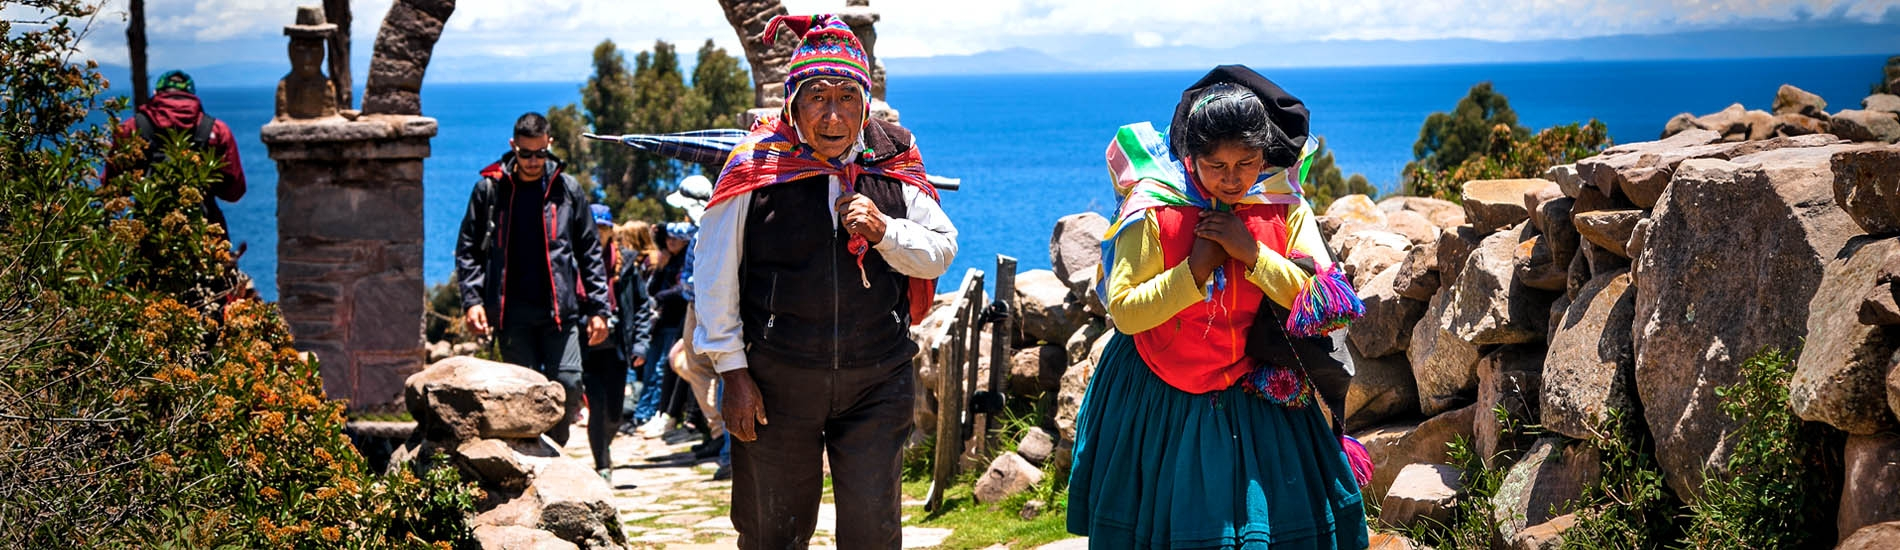 Puno - Locals walking on the Taquile island